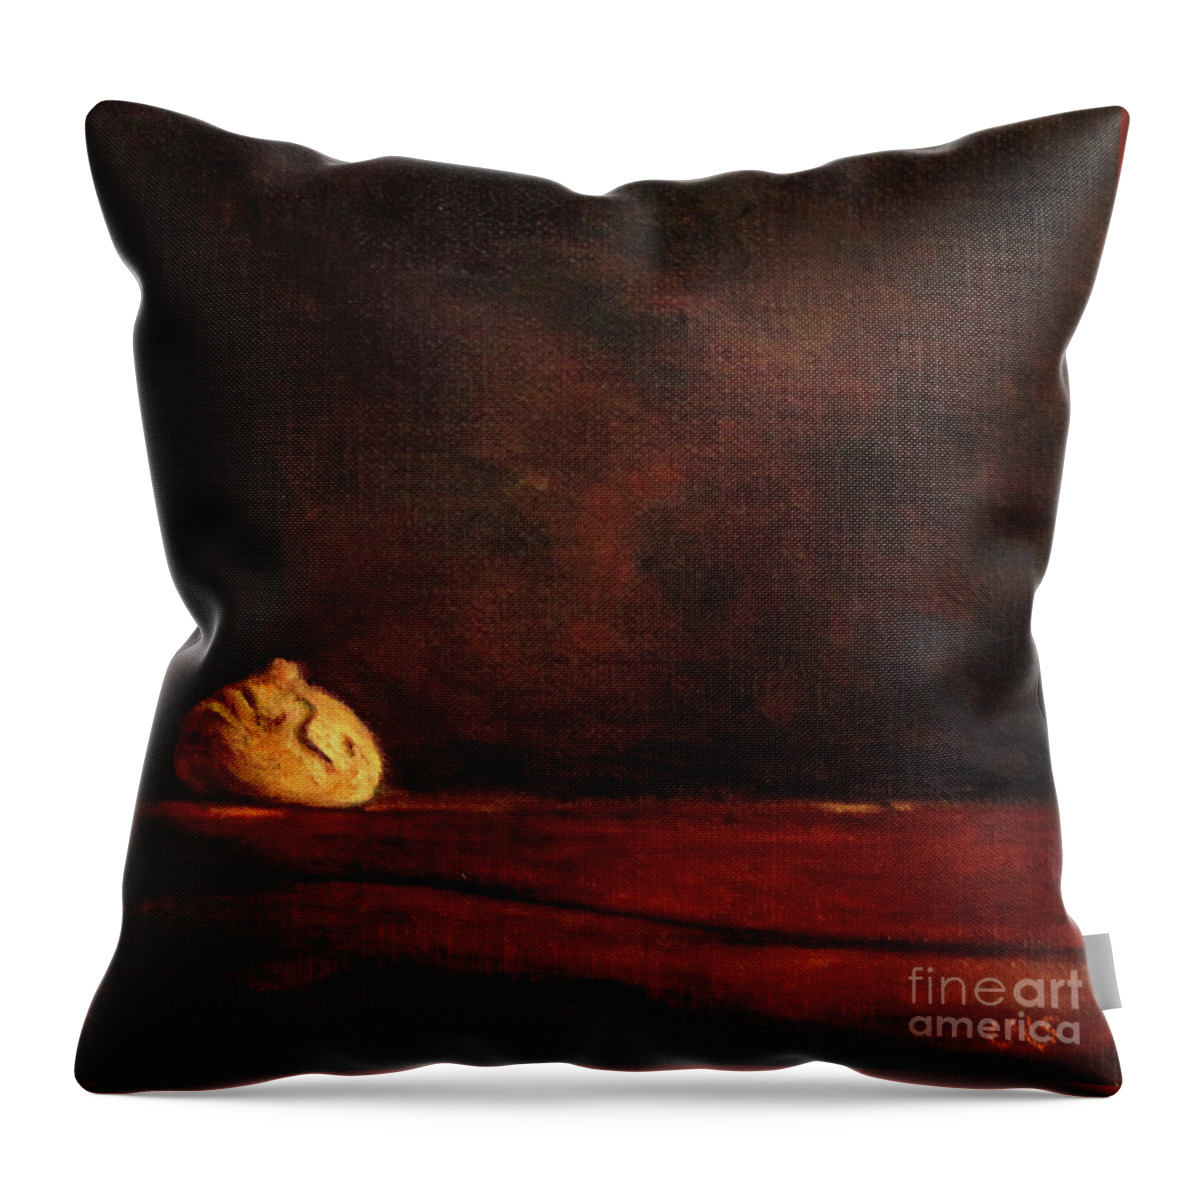 Amaretto Throw Pillow featuring the painting Amaretto by Ulrike Miesen-Schuermann